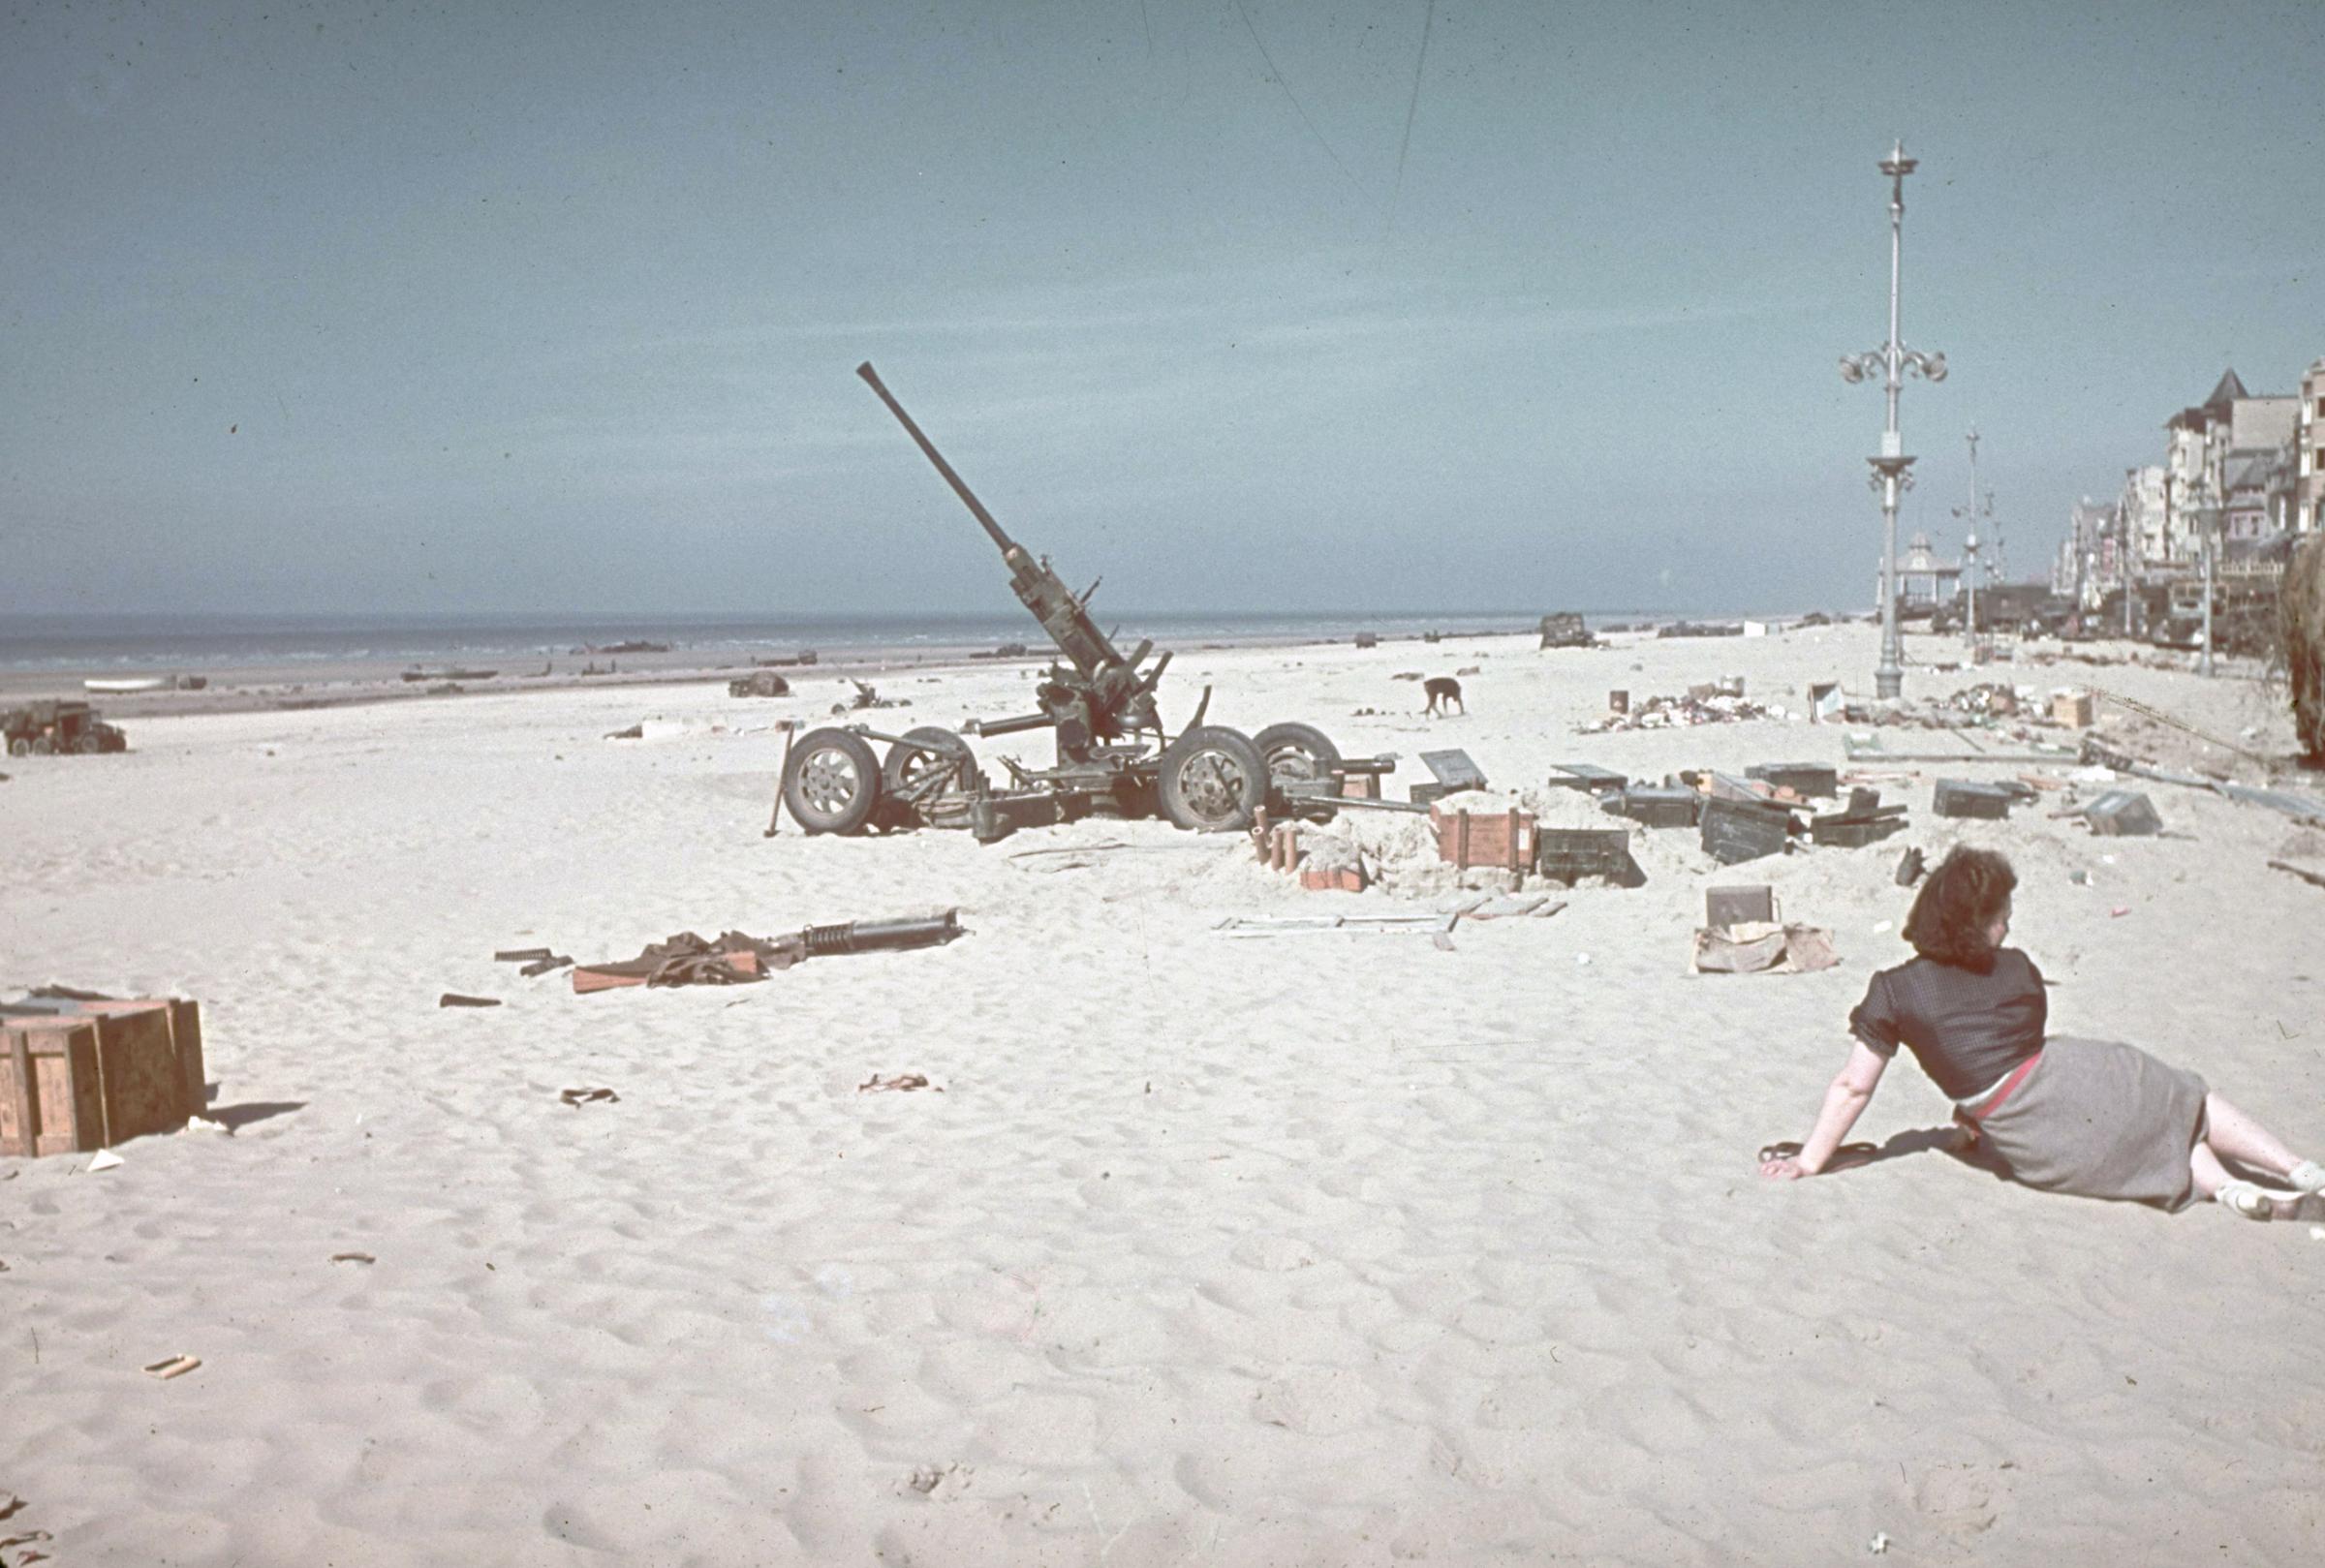 Woman lounging on beach strewn with abandoned supplies and a derelict artillery piece near Dunkirk after the Allied retreat. 1940.